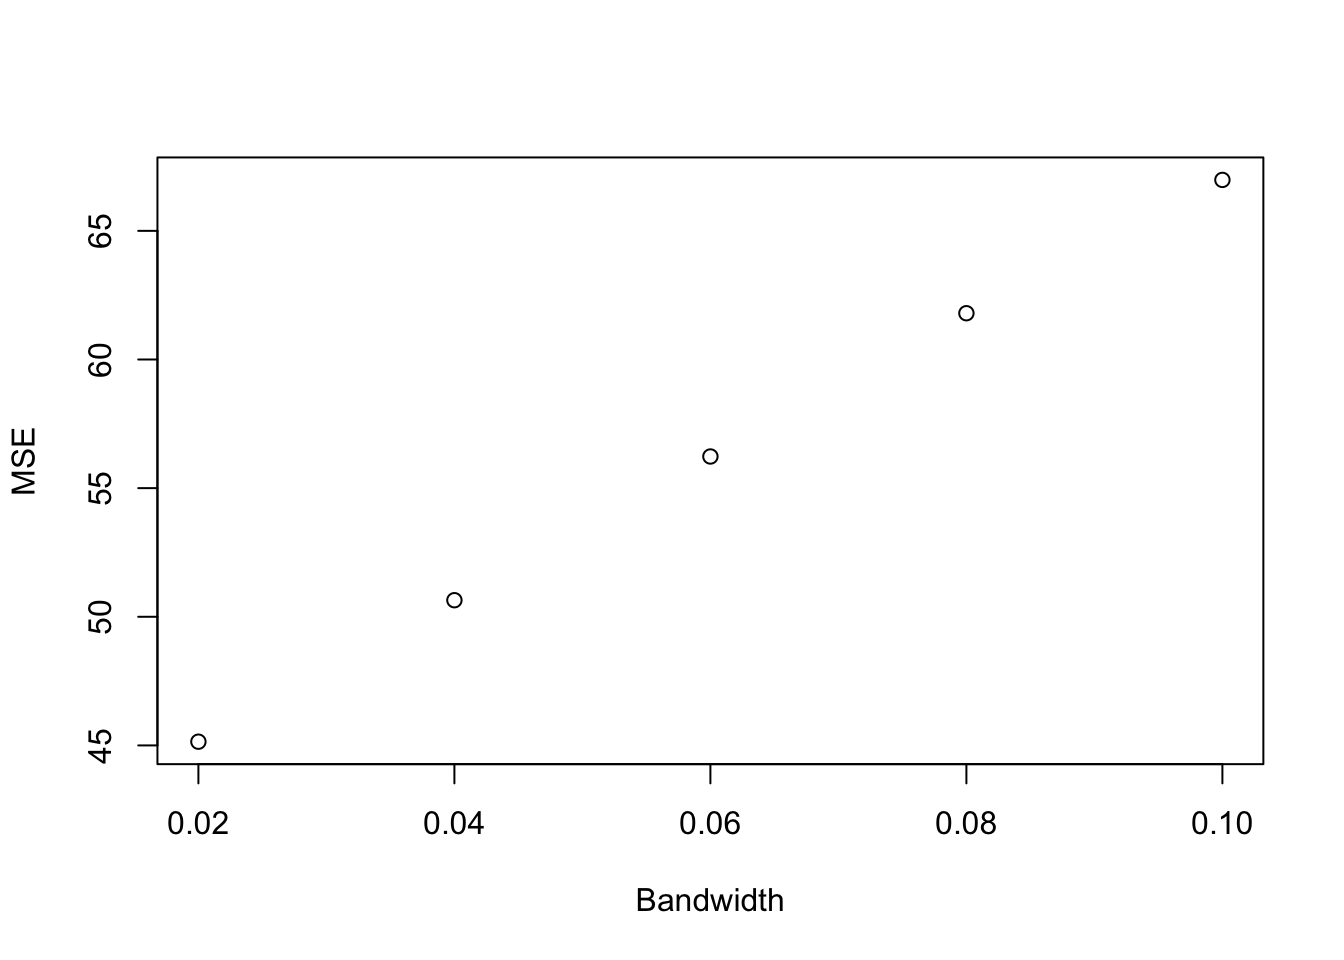 LLR Matching on the propensity score with an optimal bandwidth